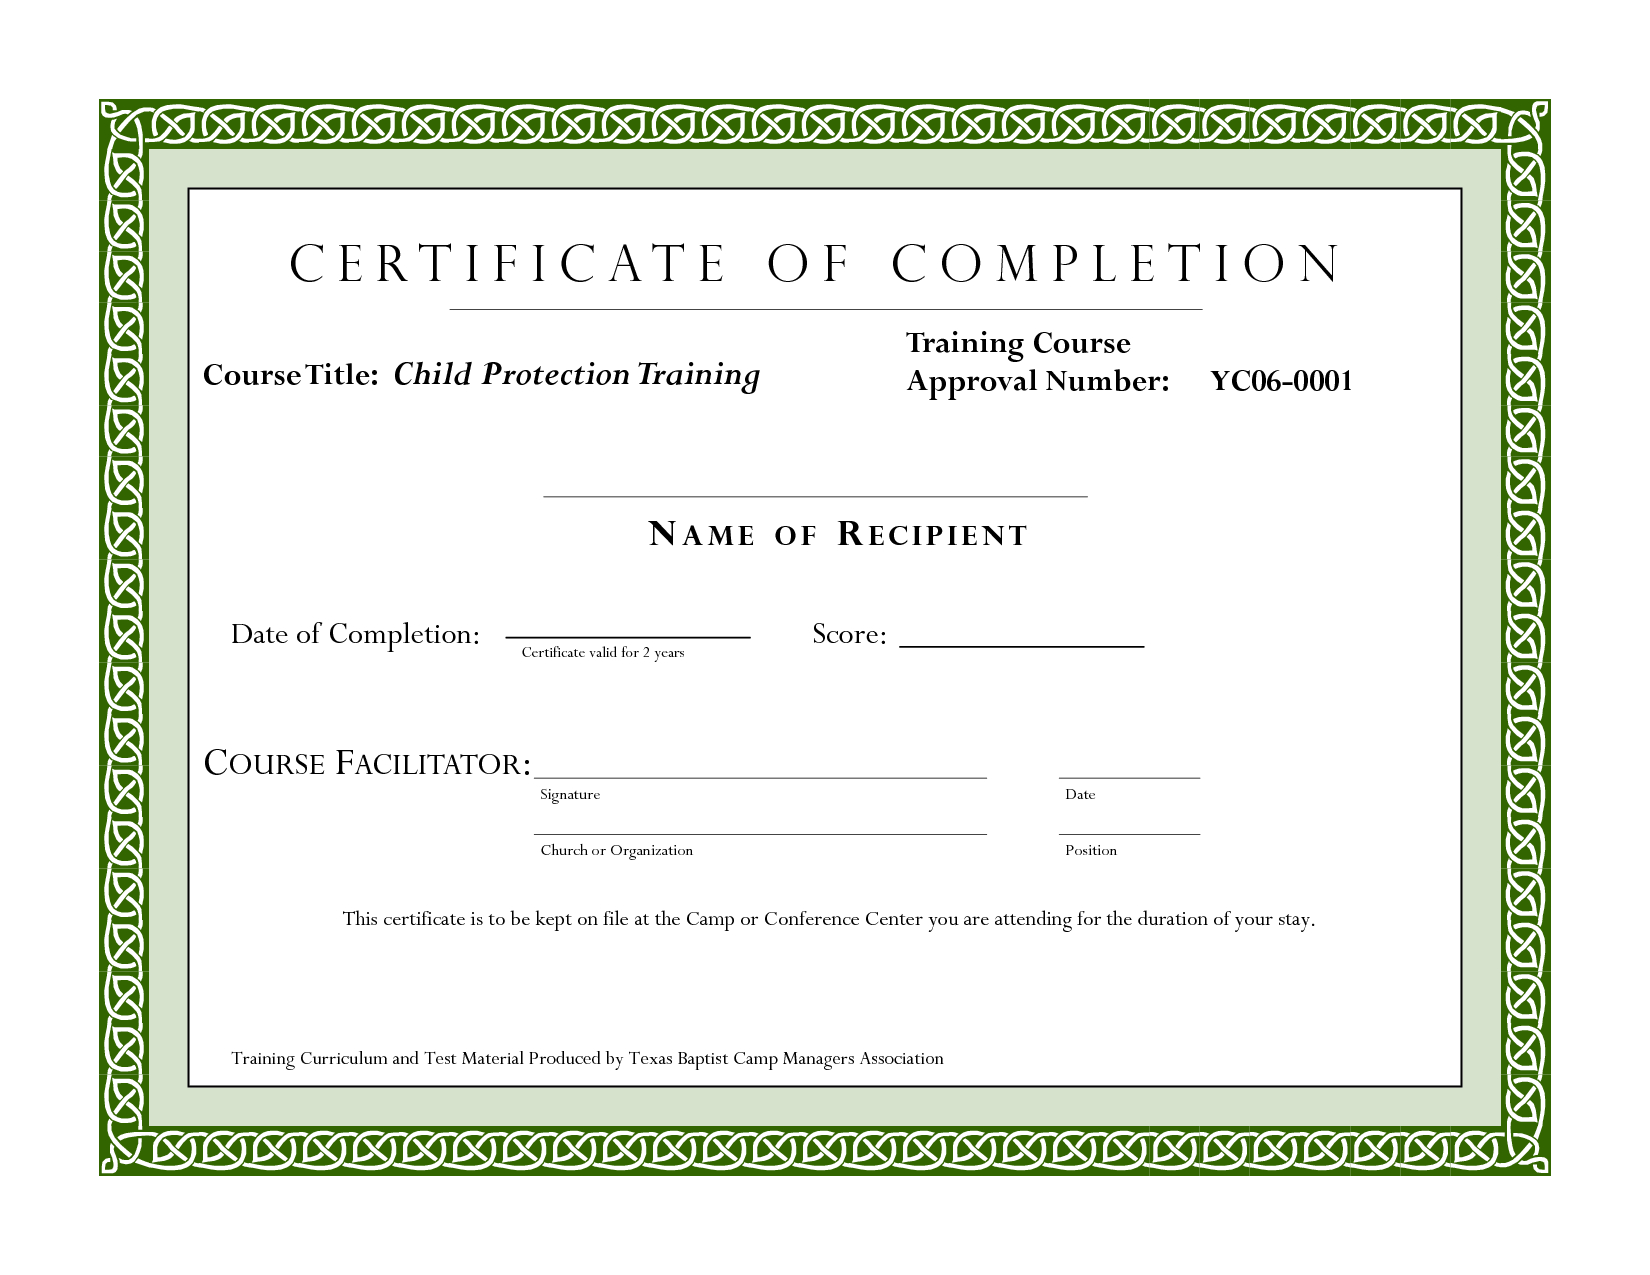 Course Completion Certificate Template | Certificate Of Regarding Template For Training Certificate